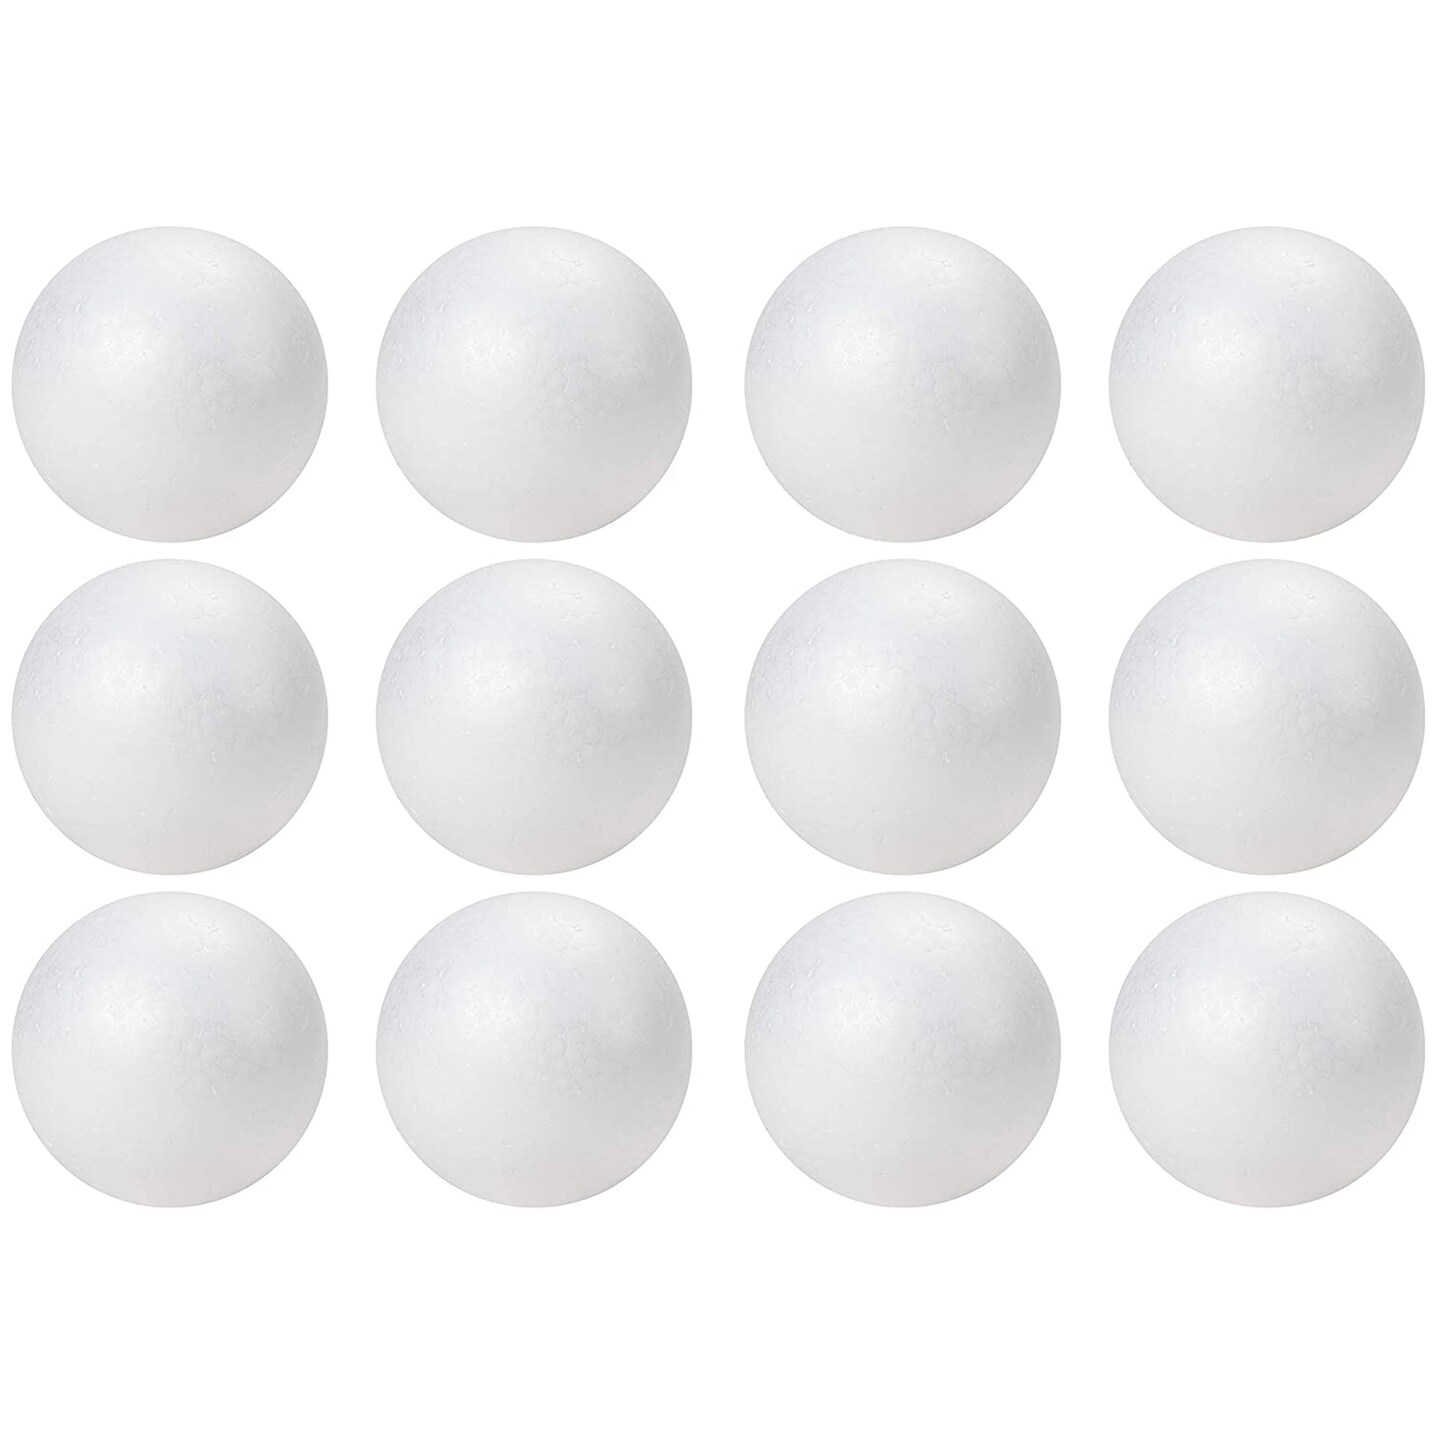 4 Inch Foam Polystyrene Balls for Art & Crafts Projects (4 Piece